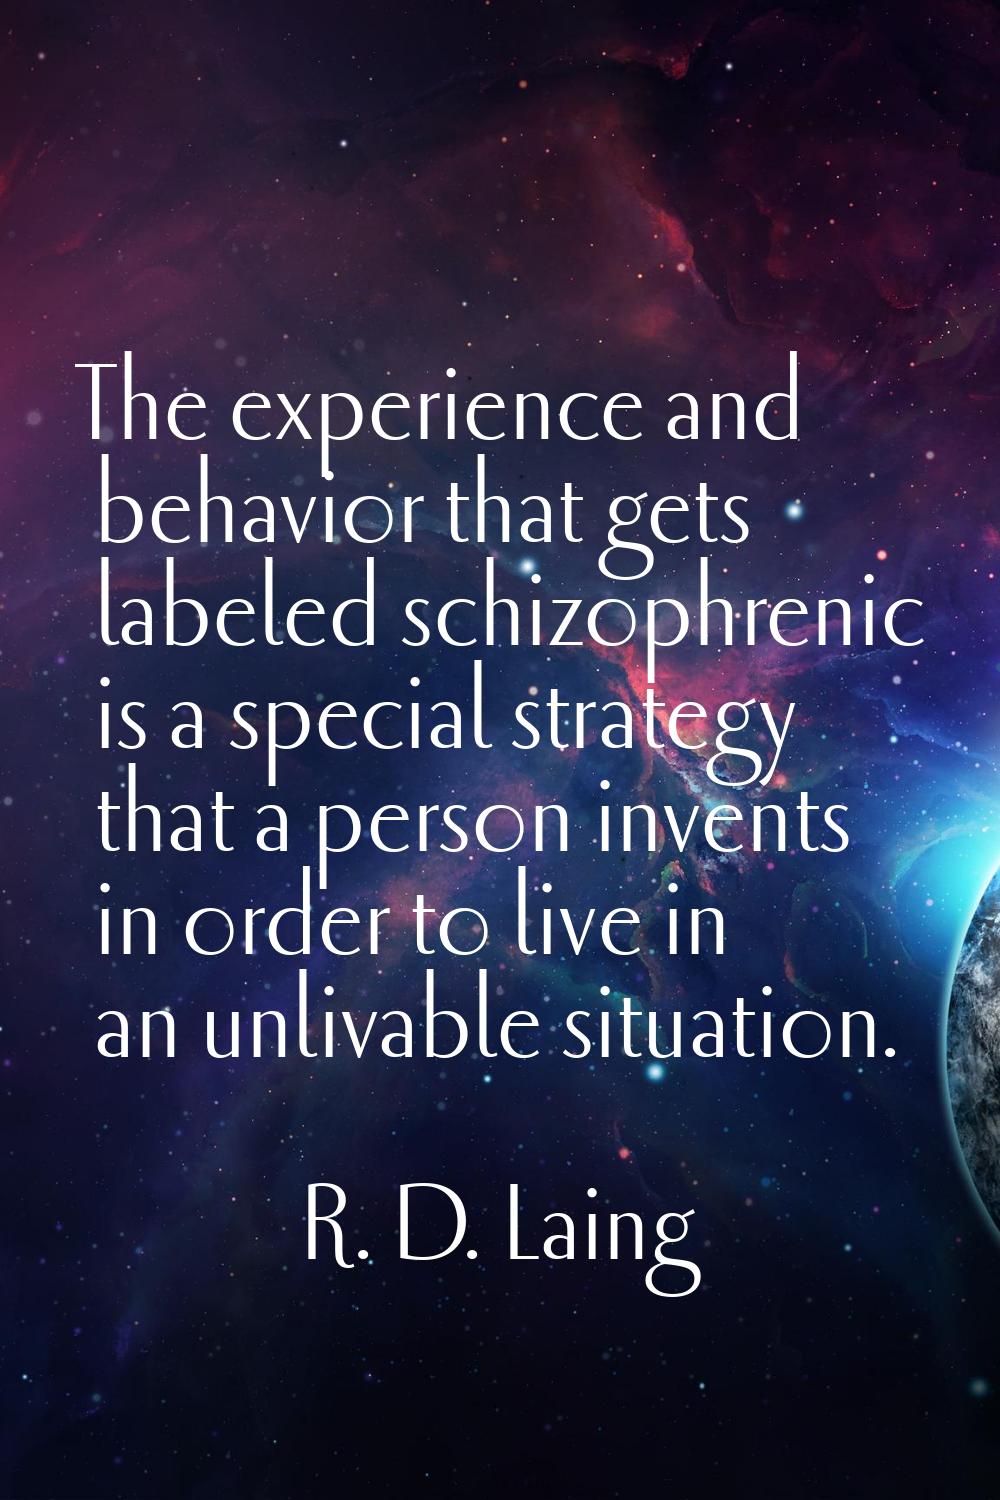 The experience and behavior that gets labeled schizophrenic is a special strategy that a person inv